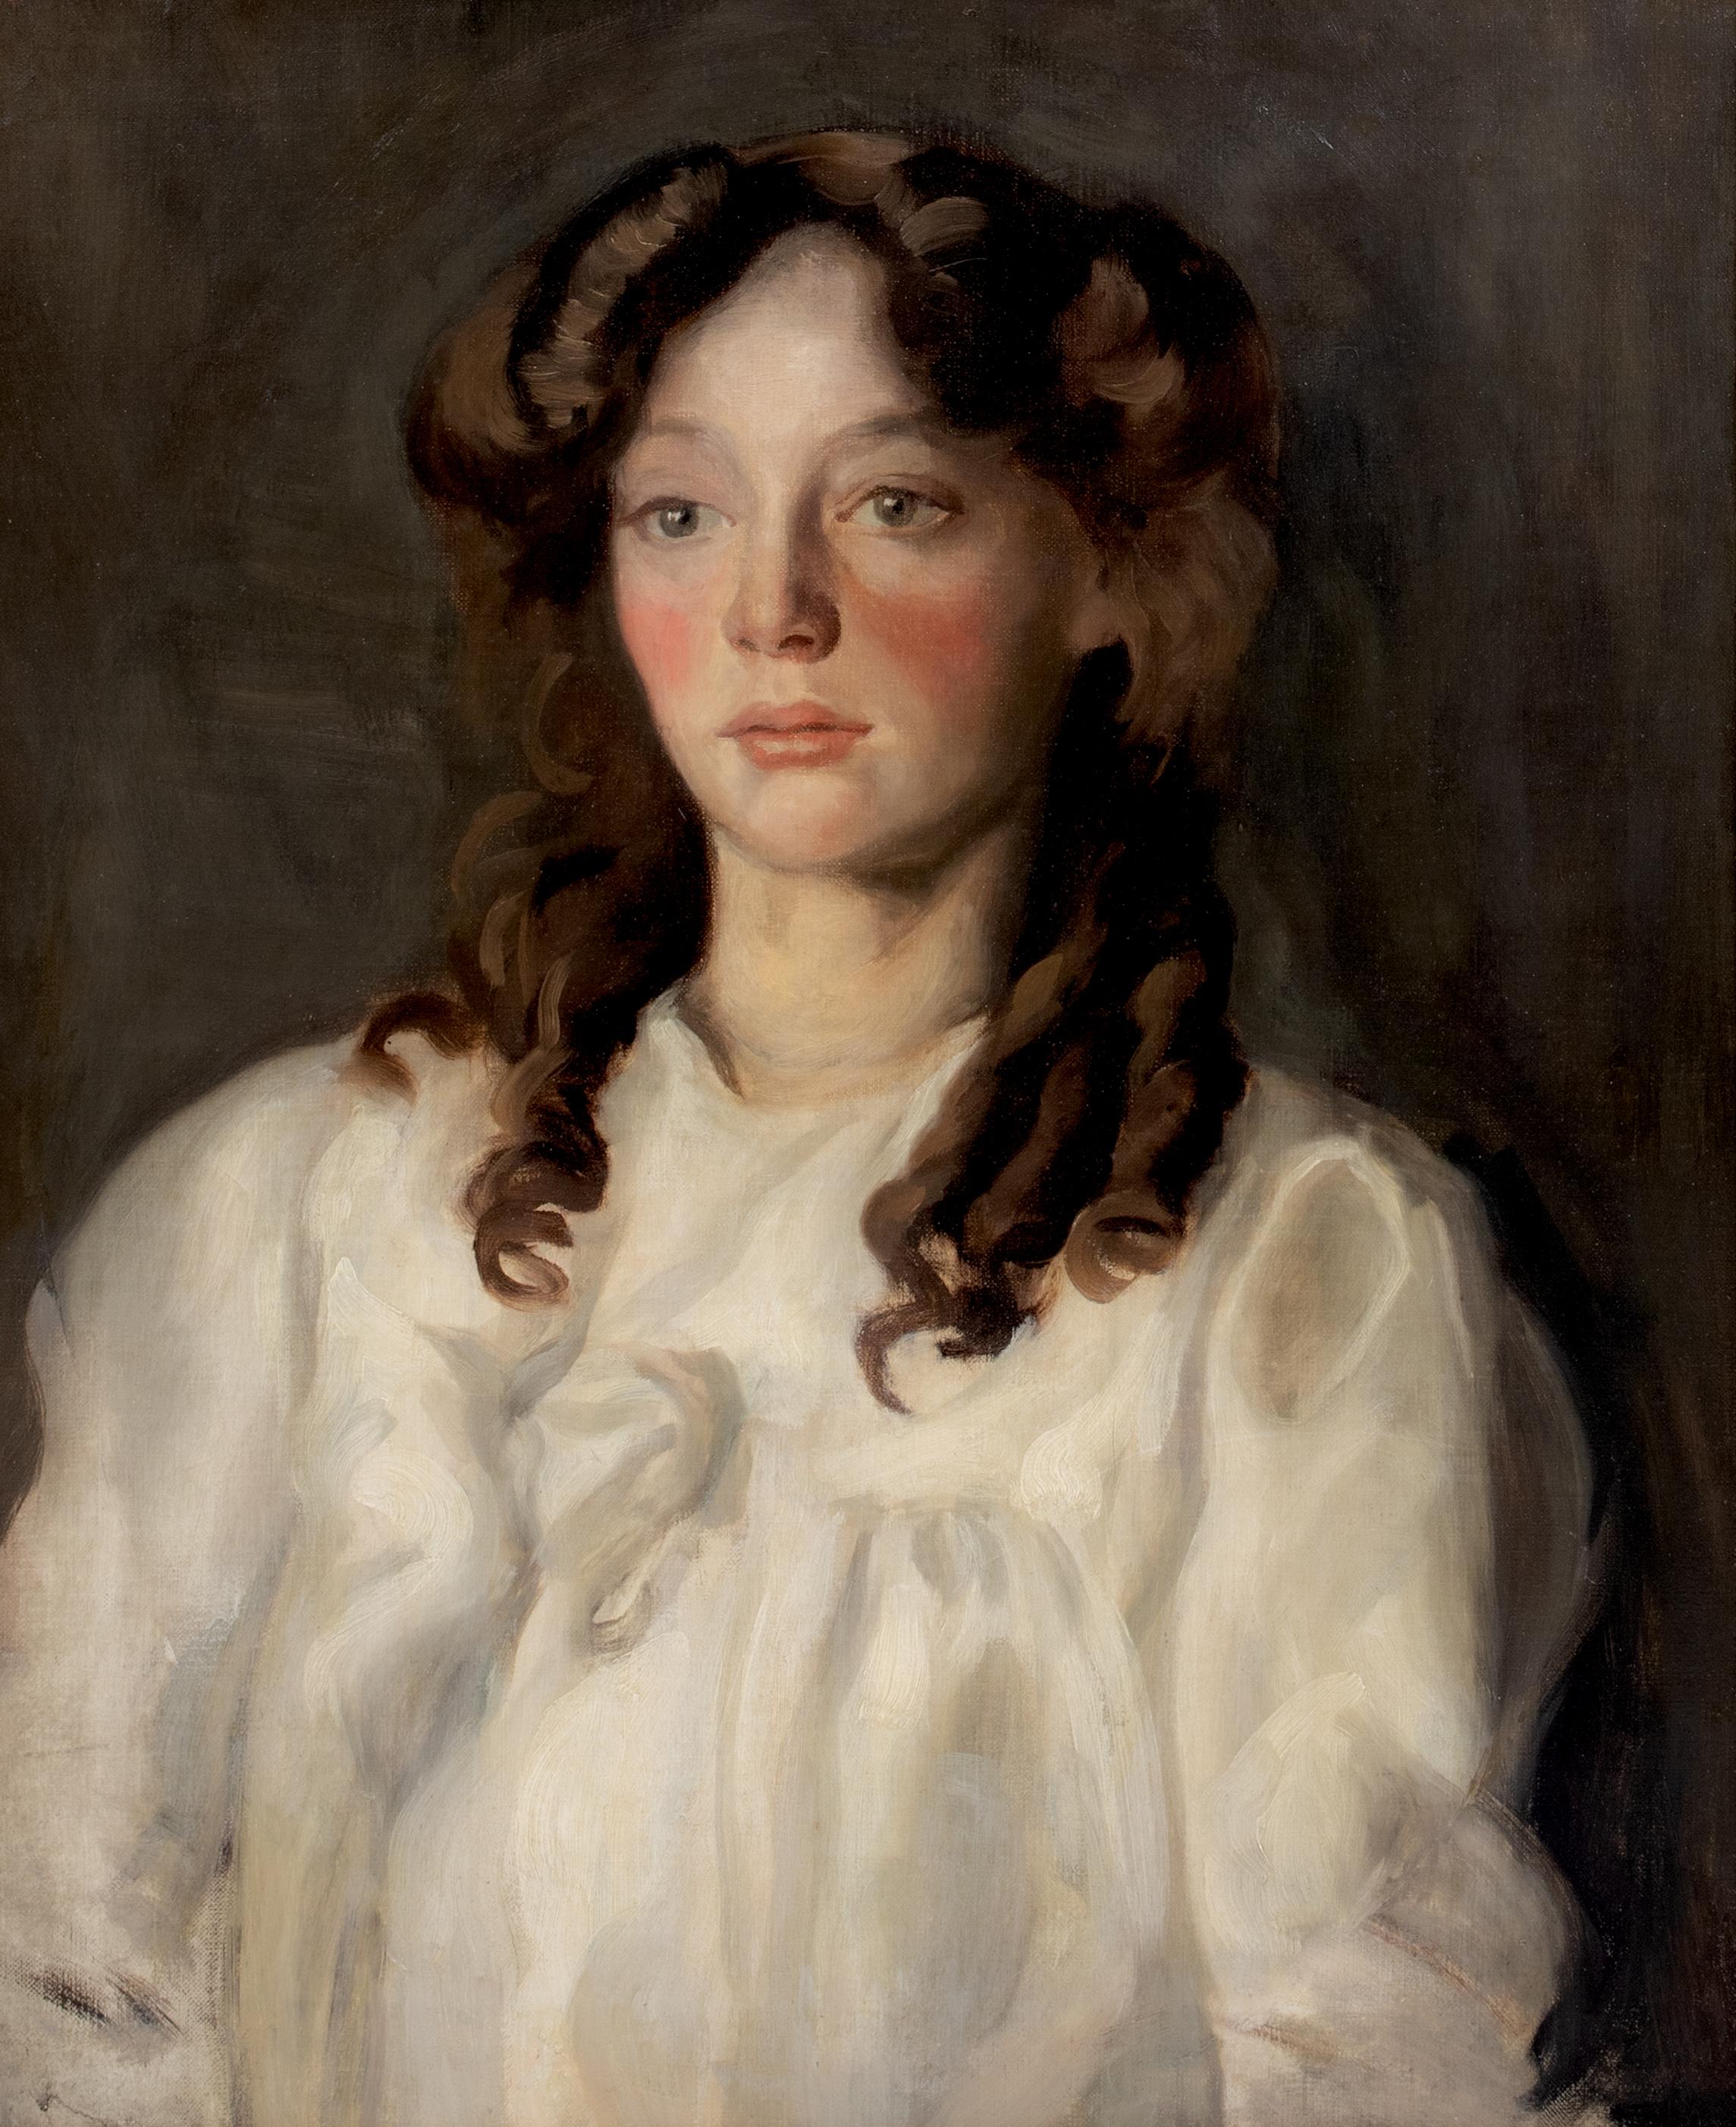 Portrait Of A Girl In White, circa 1900

Portrait Of A Girl In White Hugh RAMSAY (1877-1906)

Large circa 1900 edwardian portrait of a girl in white, oil on canvas. Excellent quality and condition period portrait similar to the works of Ramsay.